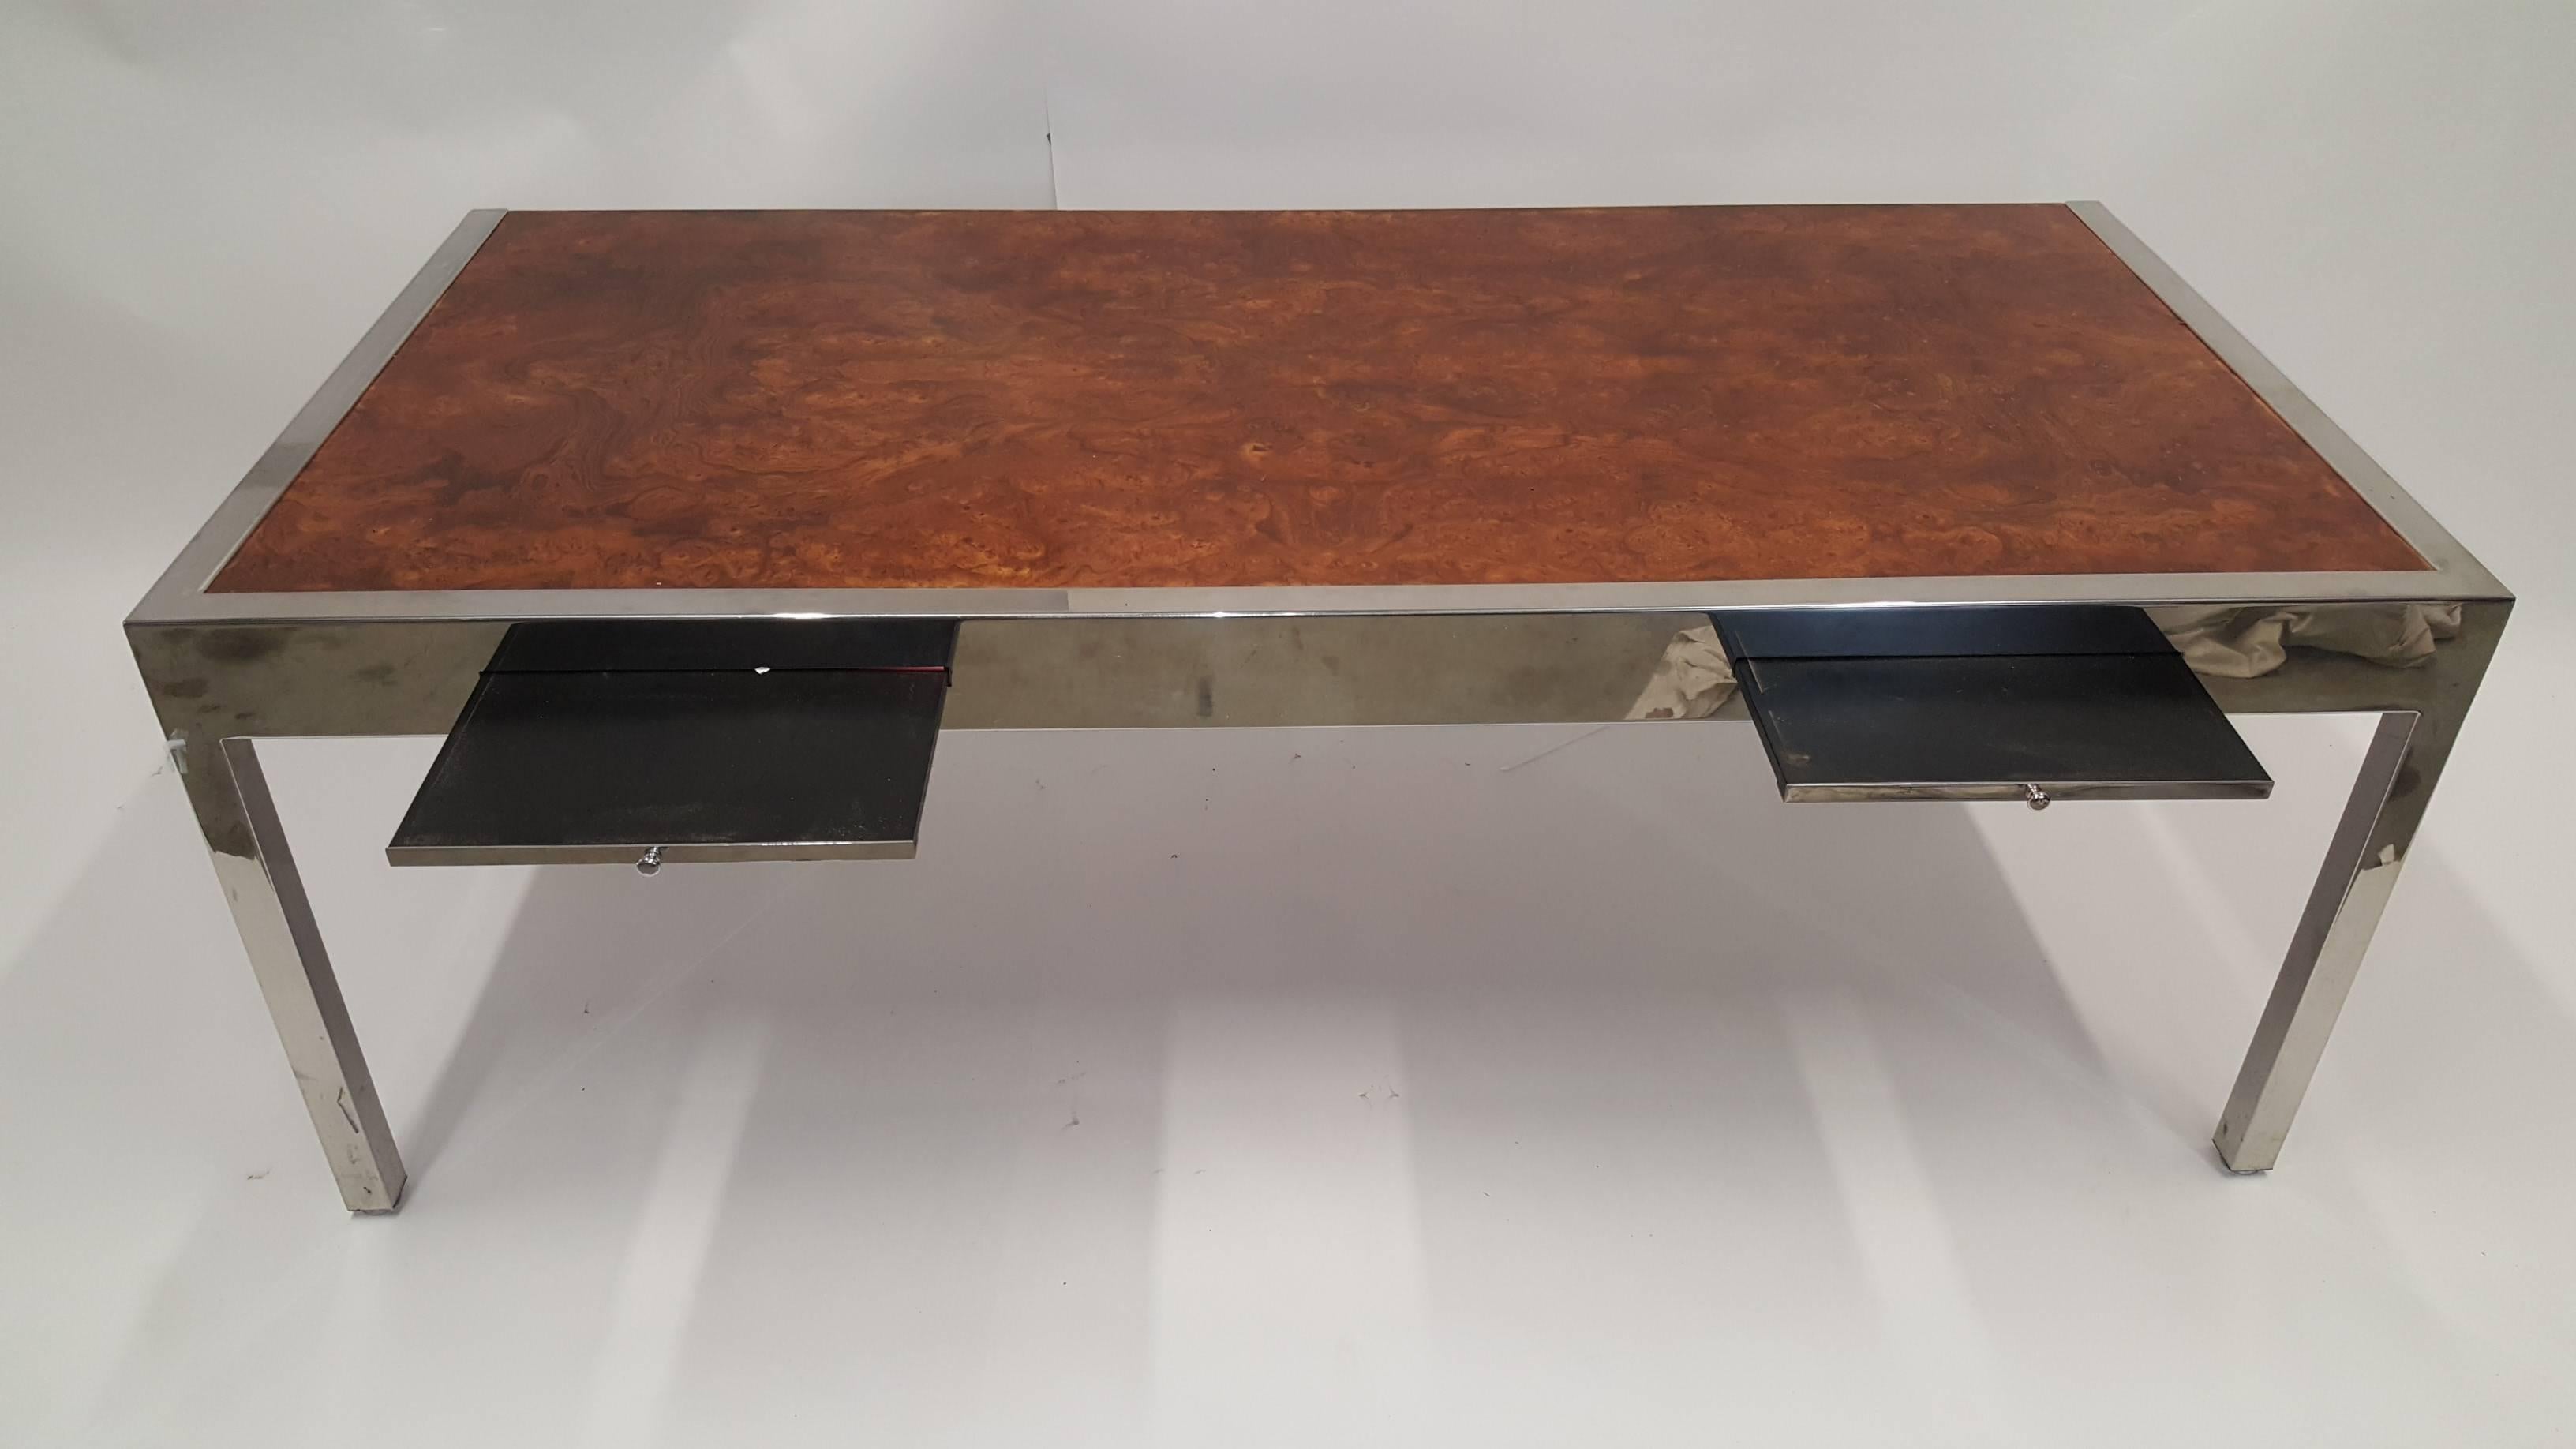 Rare four-draw pace pencil desk with pull-out trays. Beautiful burl wood with chrome frame. Well-constructed. Designed by Leon Rosen.  Some surface wear on top of desk.